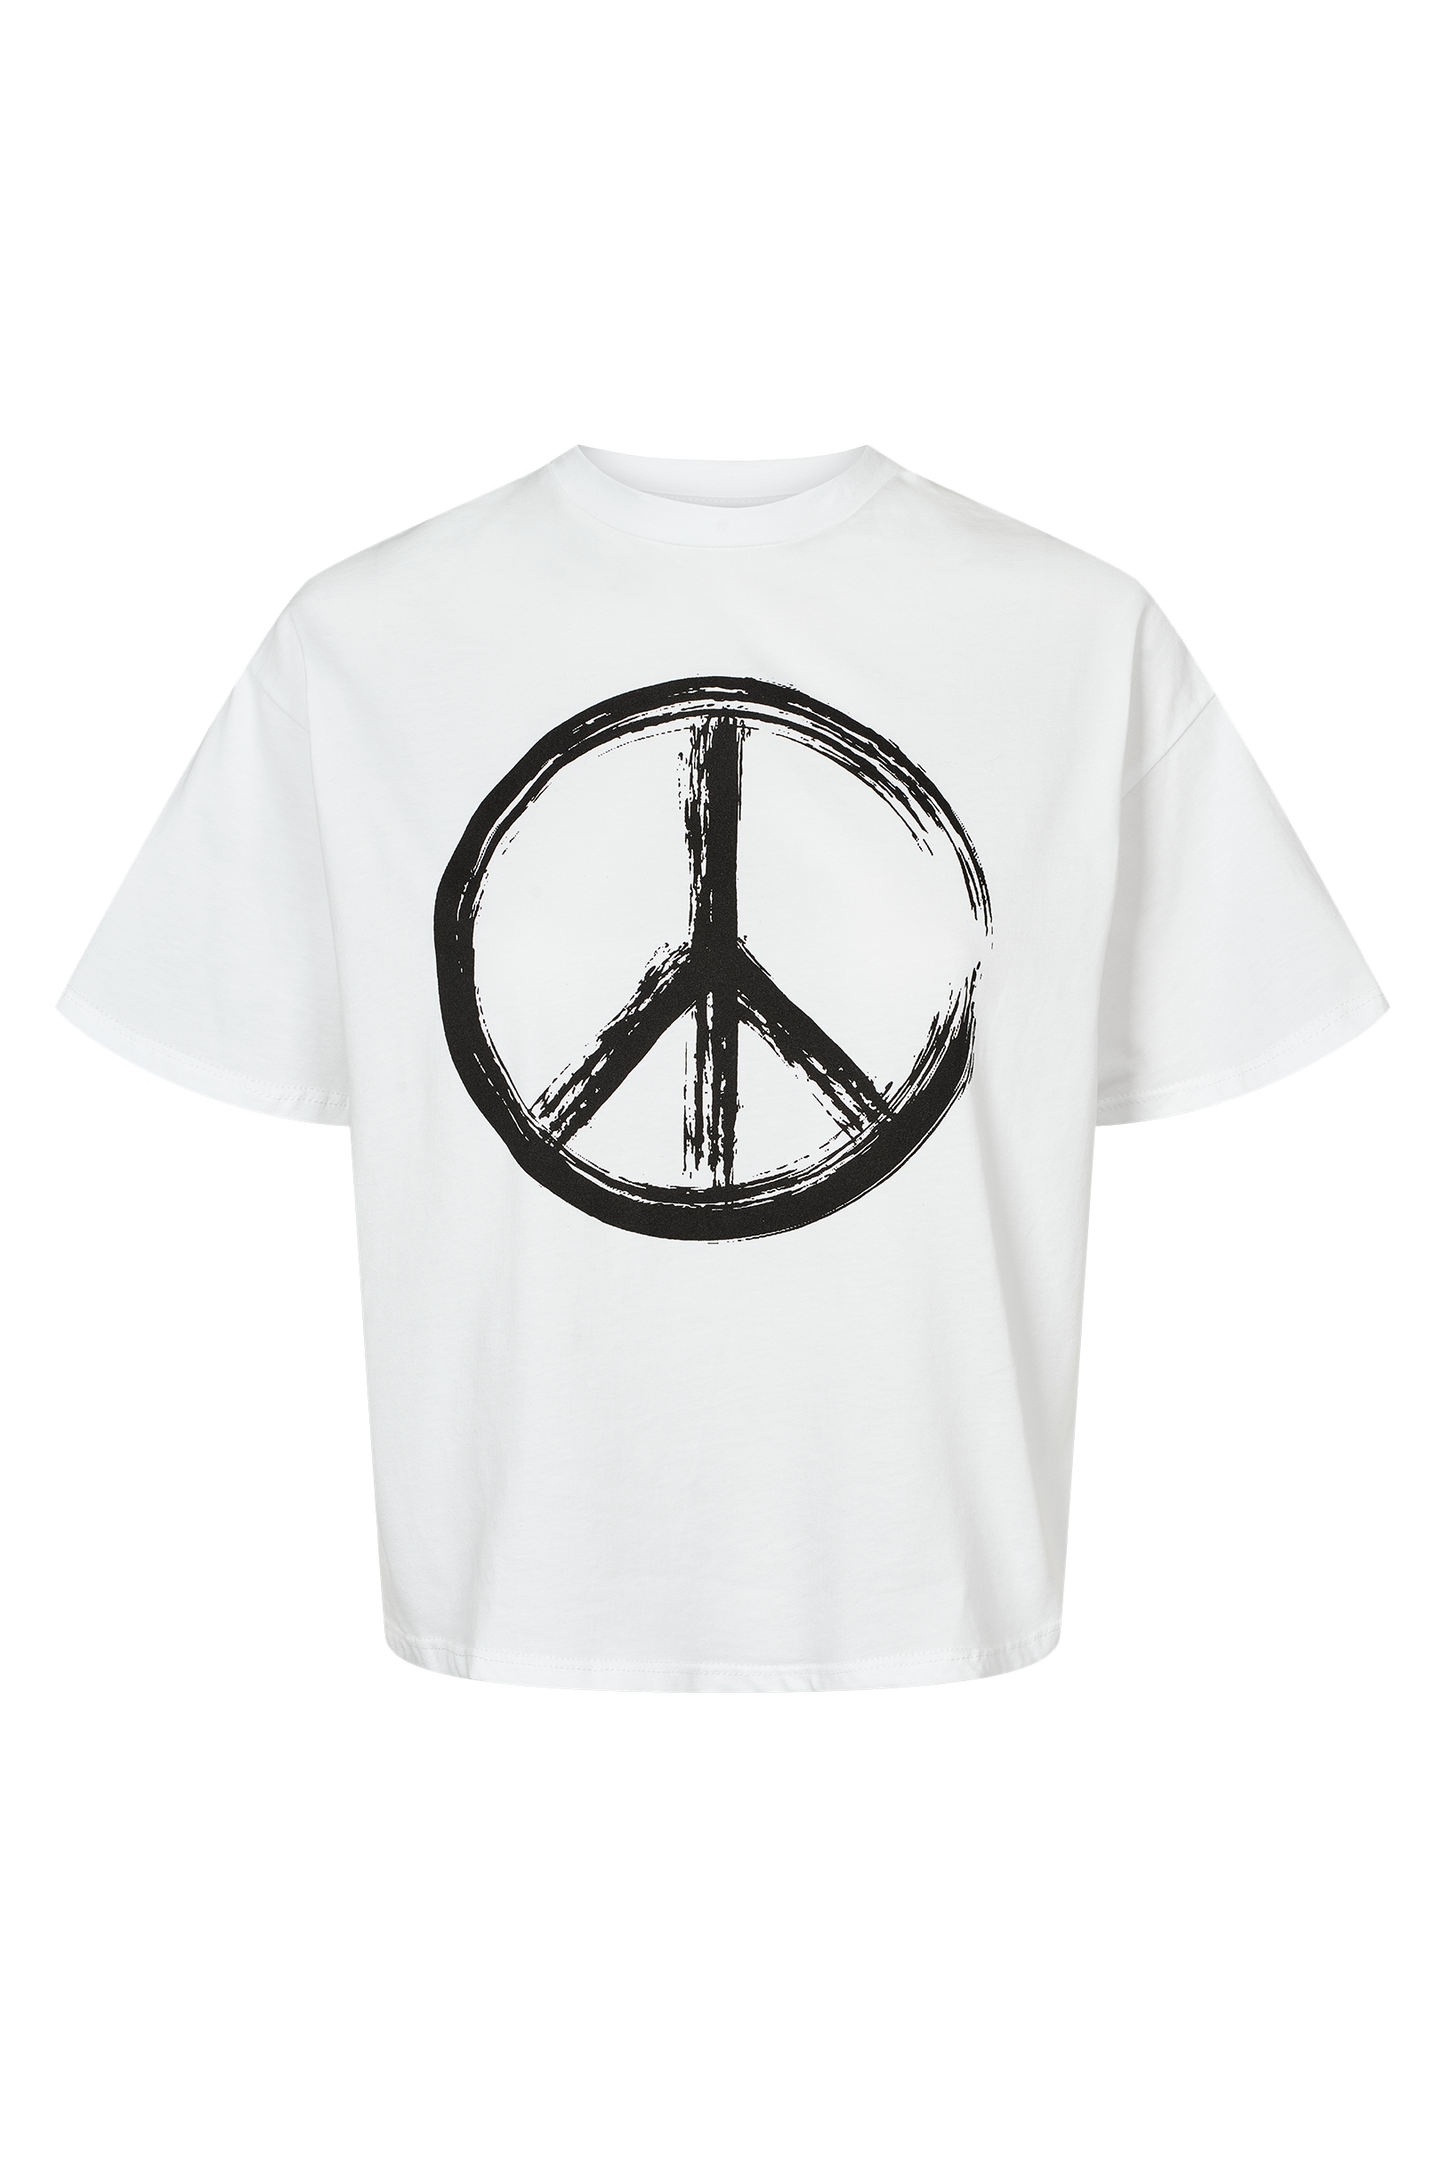 T-Shirt Cropped White Peace Cotton Tee W/ Black Letters